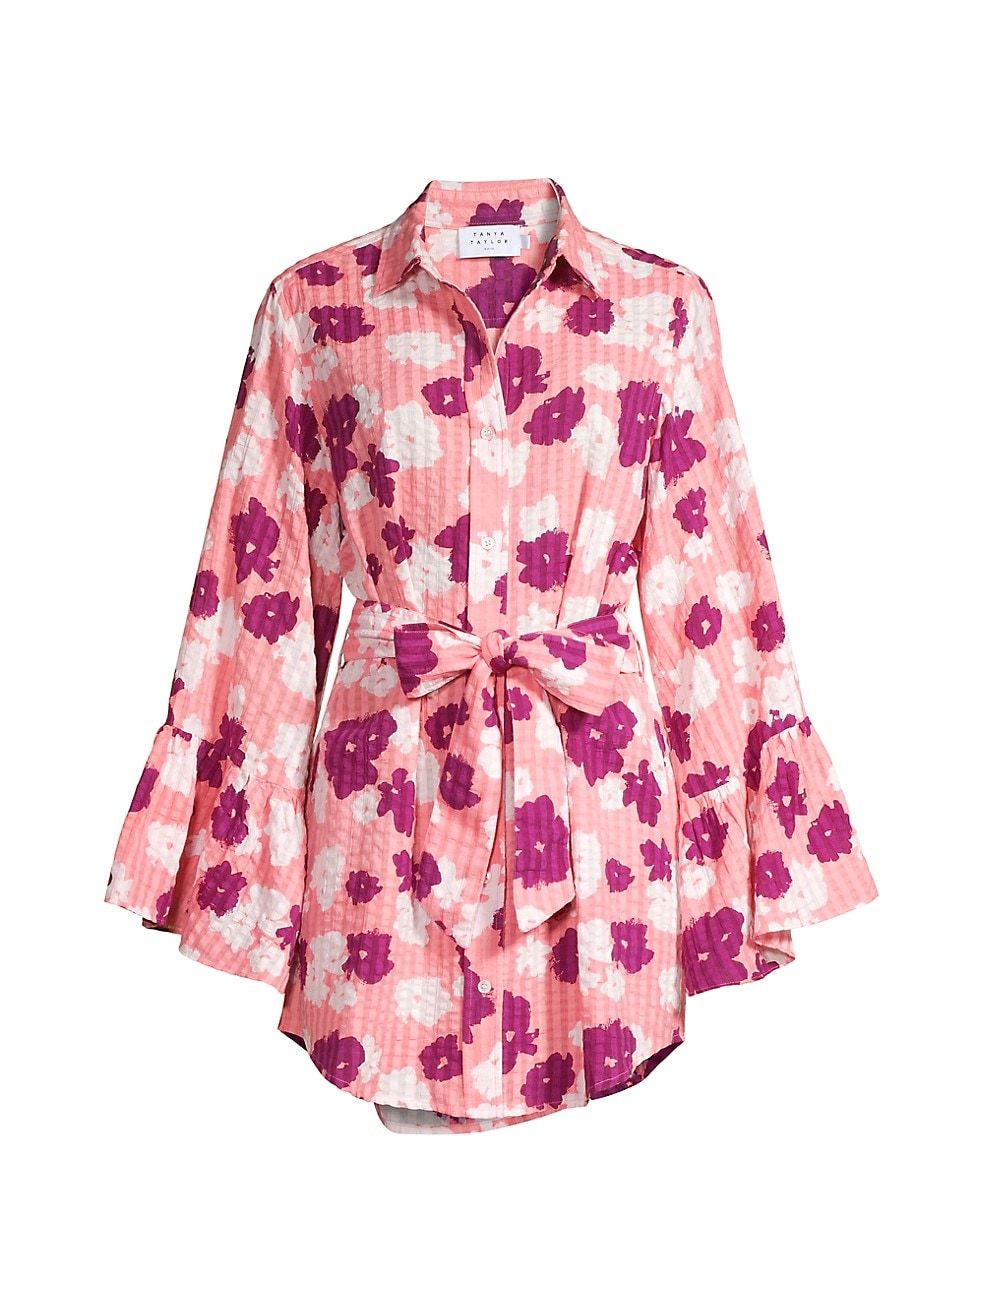 Tanya Taylor Alena Floral Cotton Cover-Up Dress | Saks Fifth Avenue